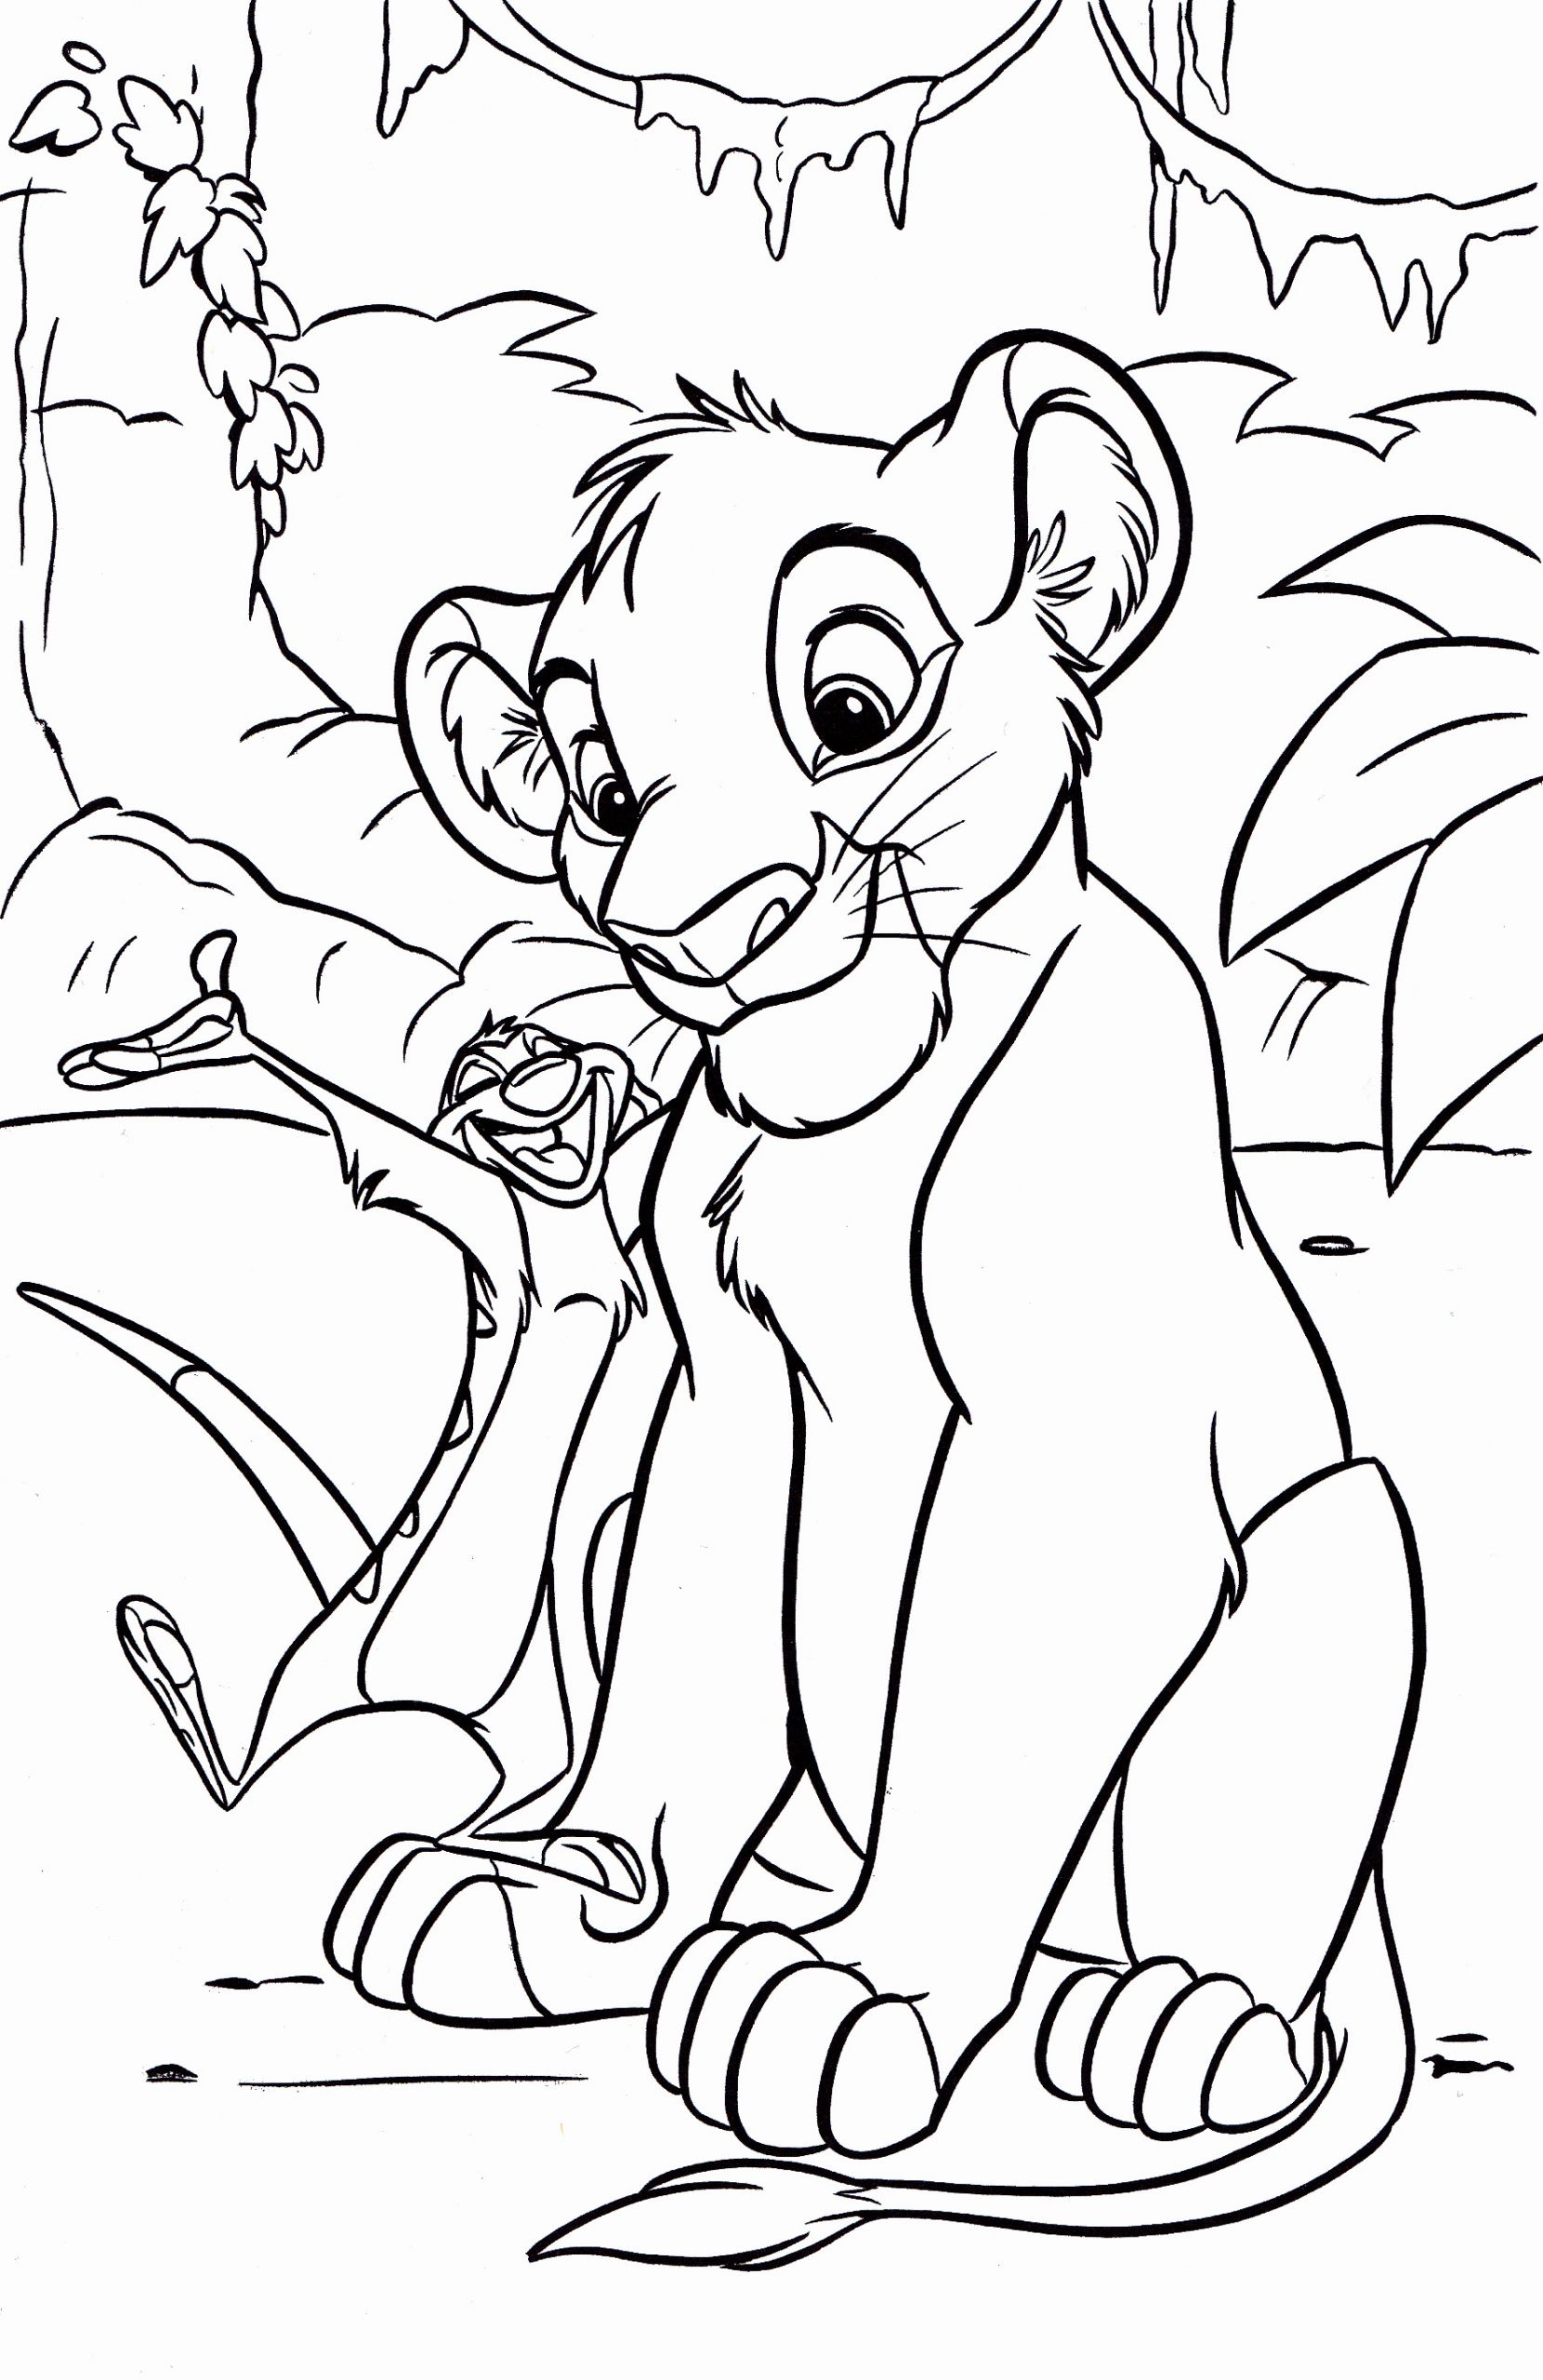 Free Disney Coloring Pages For Kids
 Free Printable Simba Coloring Pages For Kids